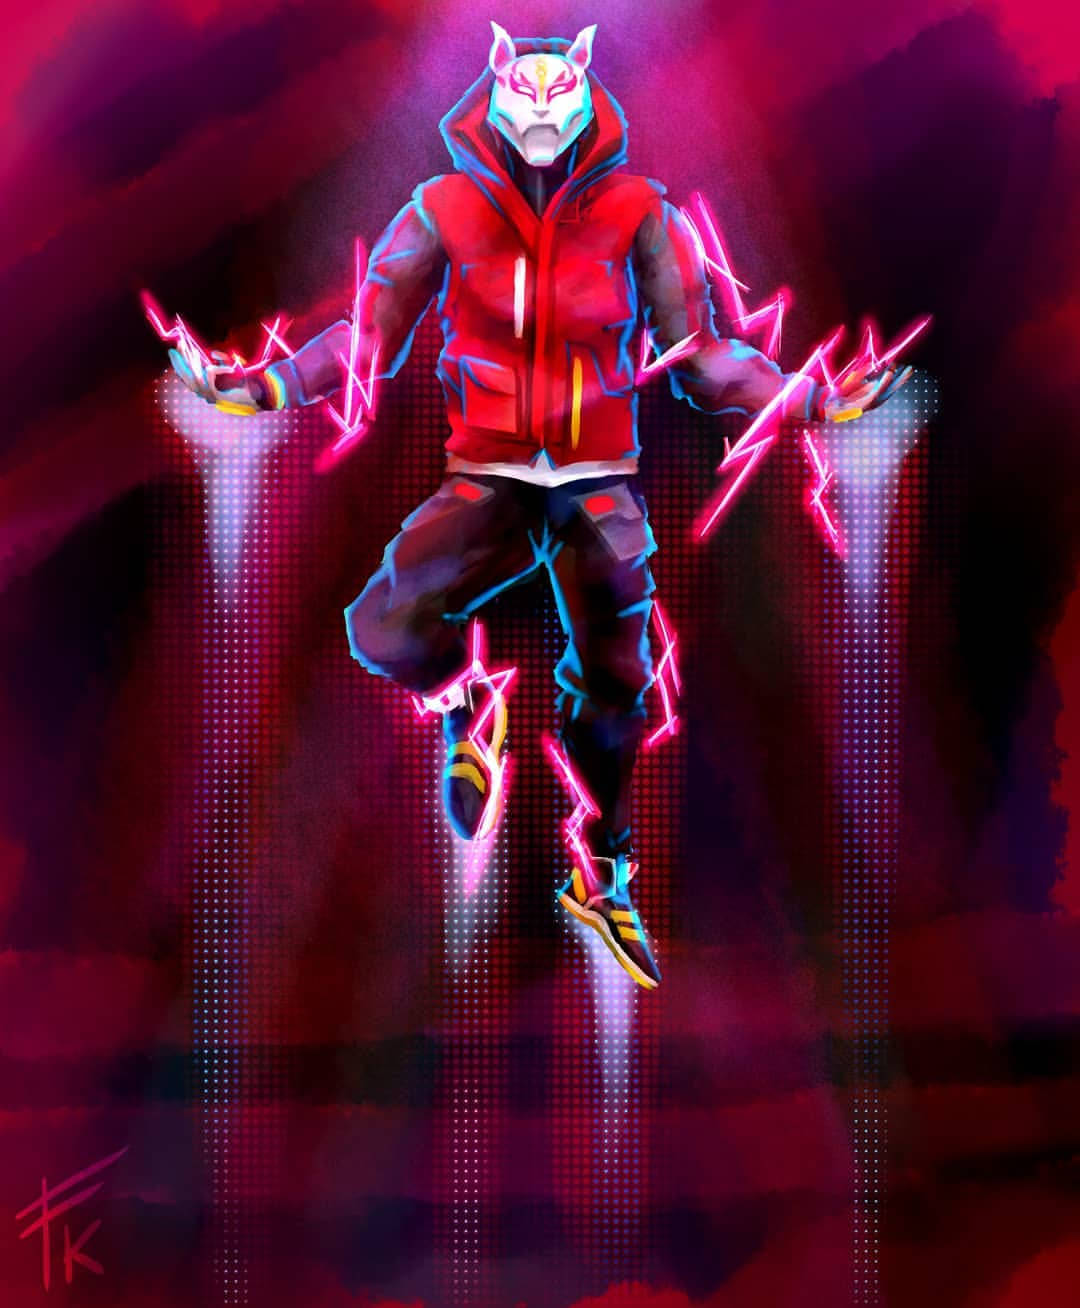 Cool Fortnite Skin Drift Jumping In Red Outfit Wallpaper